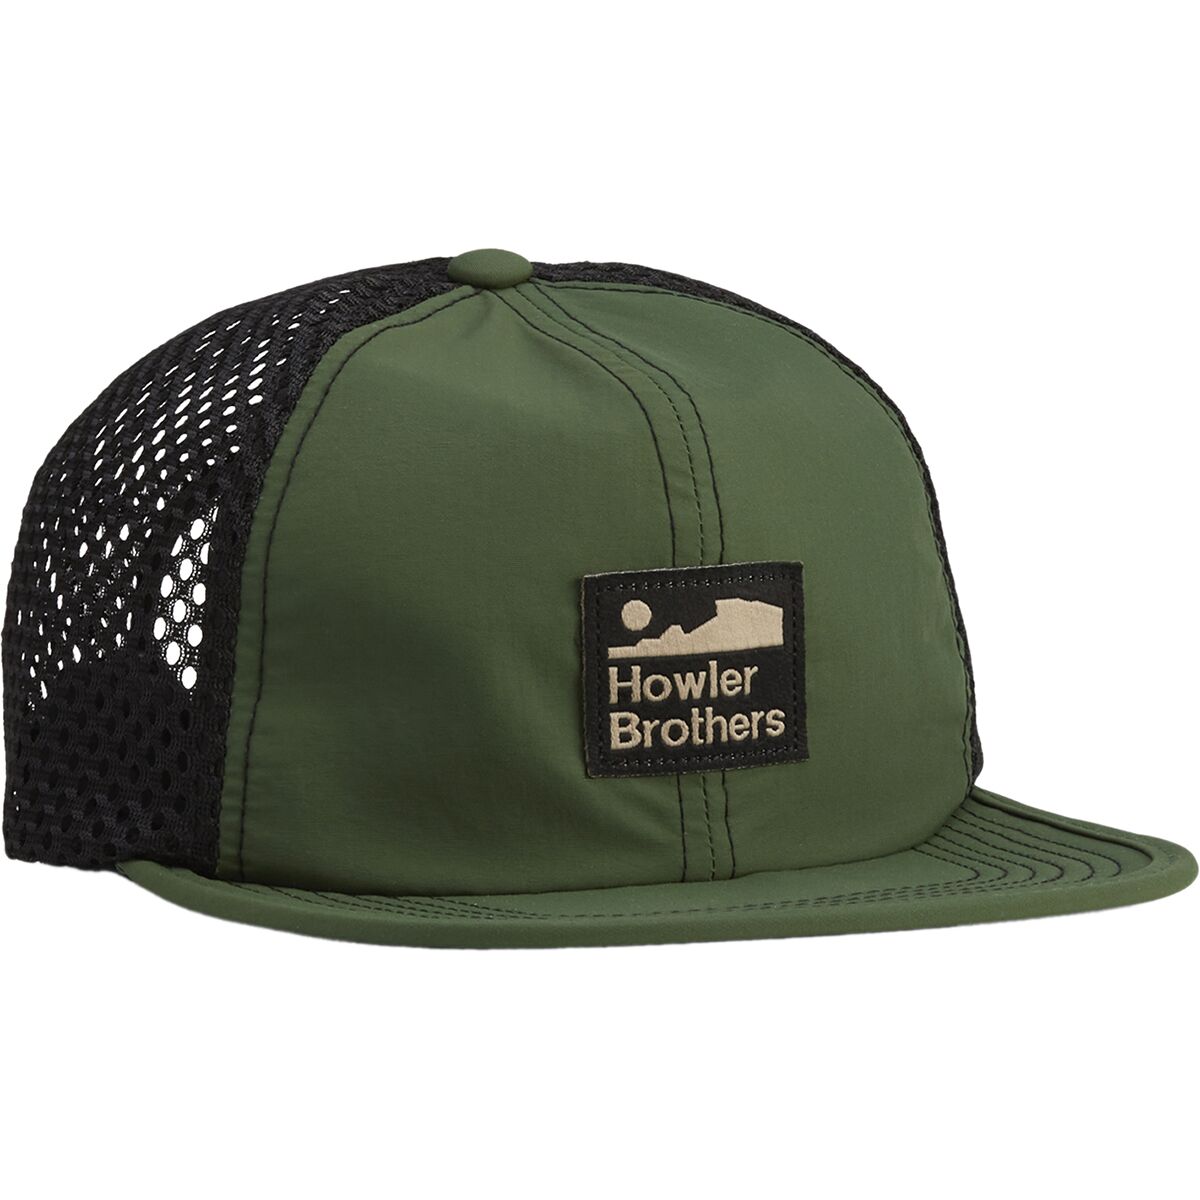 Howler Brothers Arroyo Tech Strapback Hat